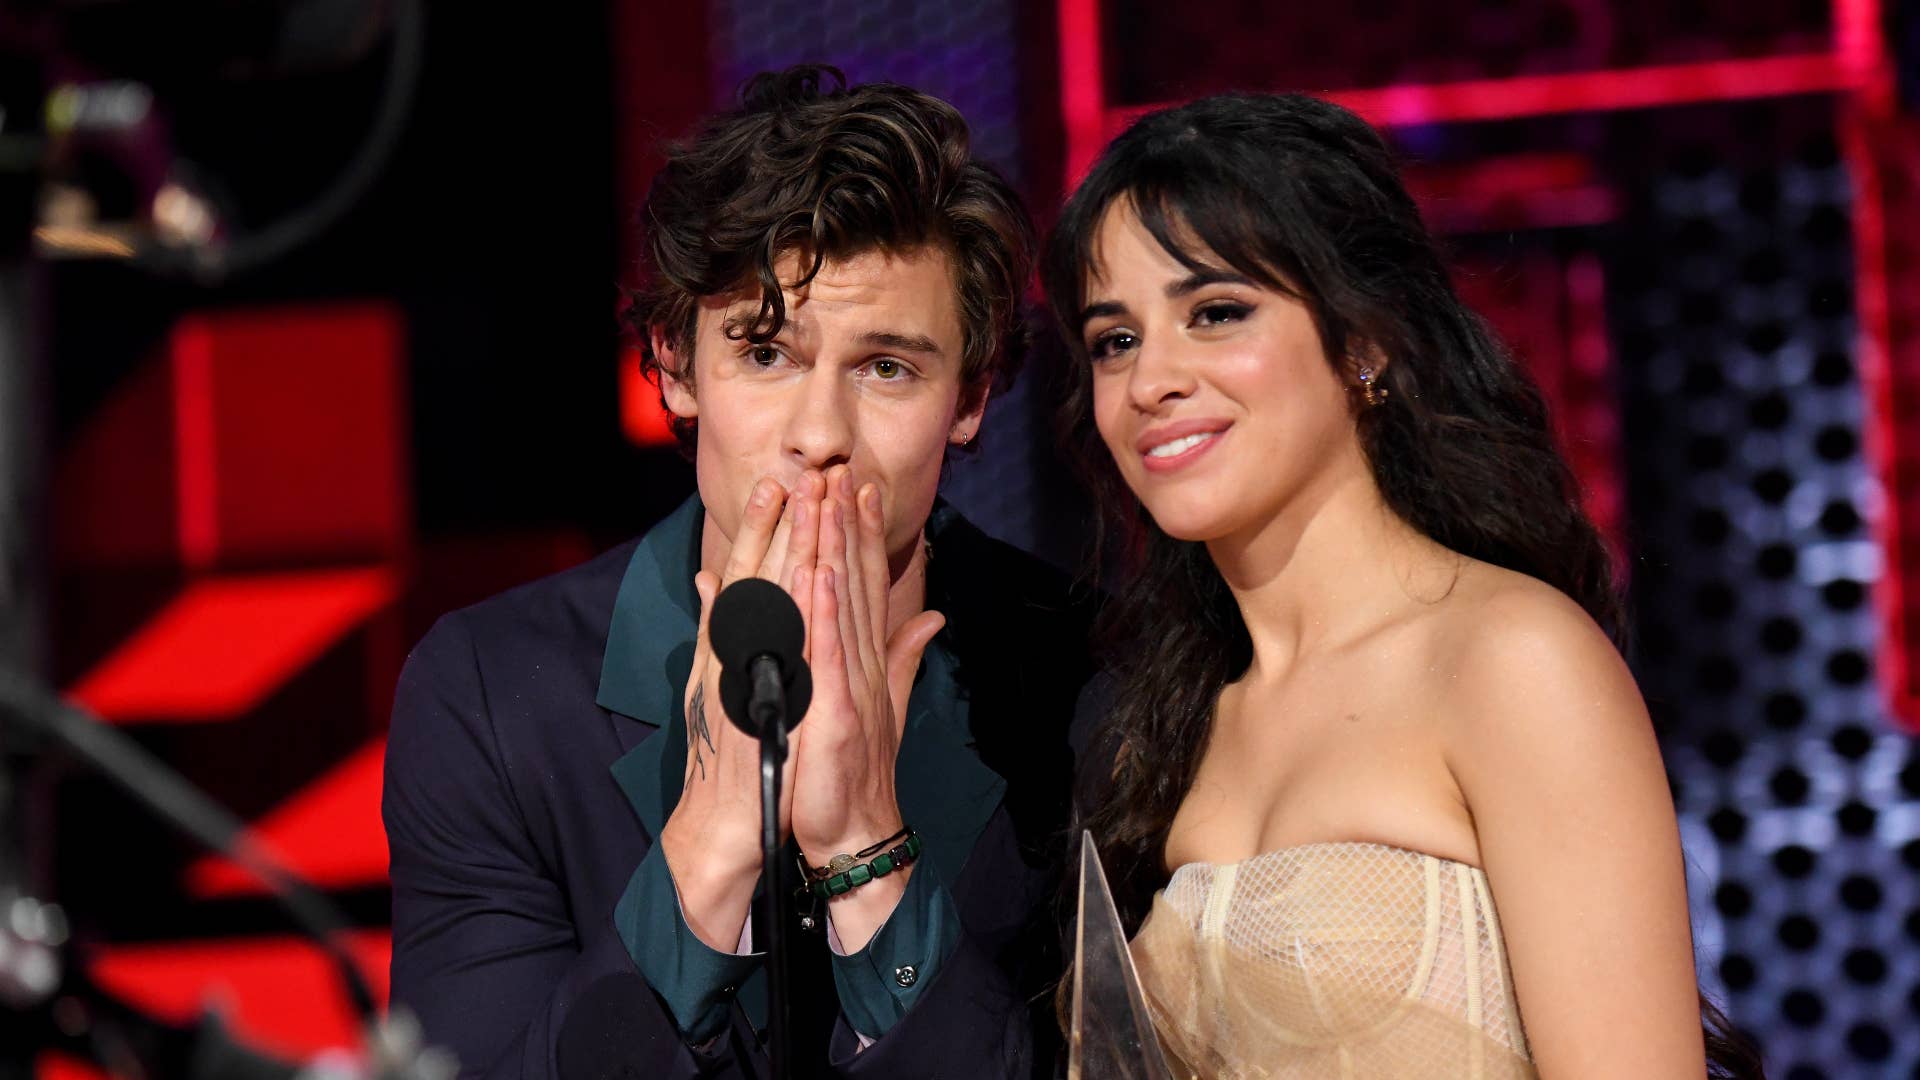 Shawn Mendes and Camila Cabello accept the Collaboration of the Year award onstage.